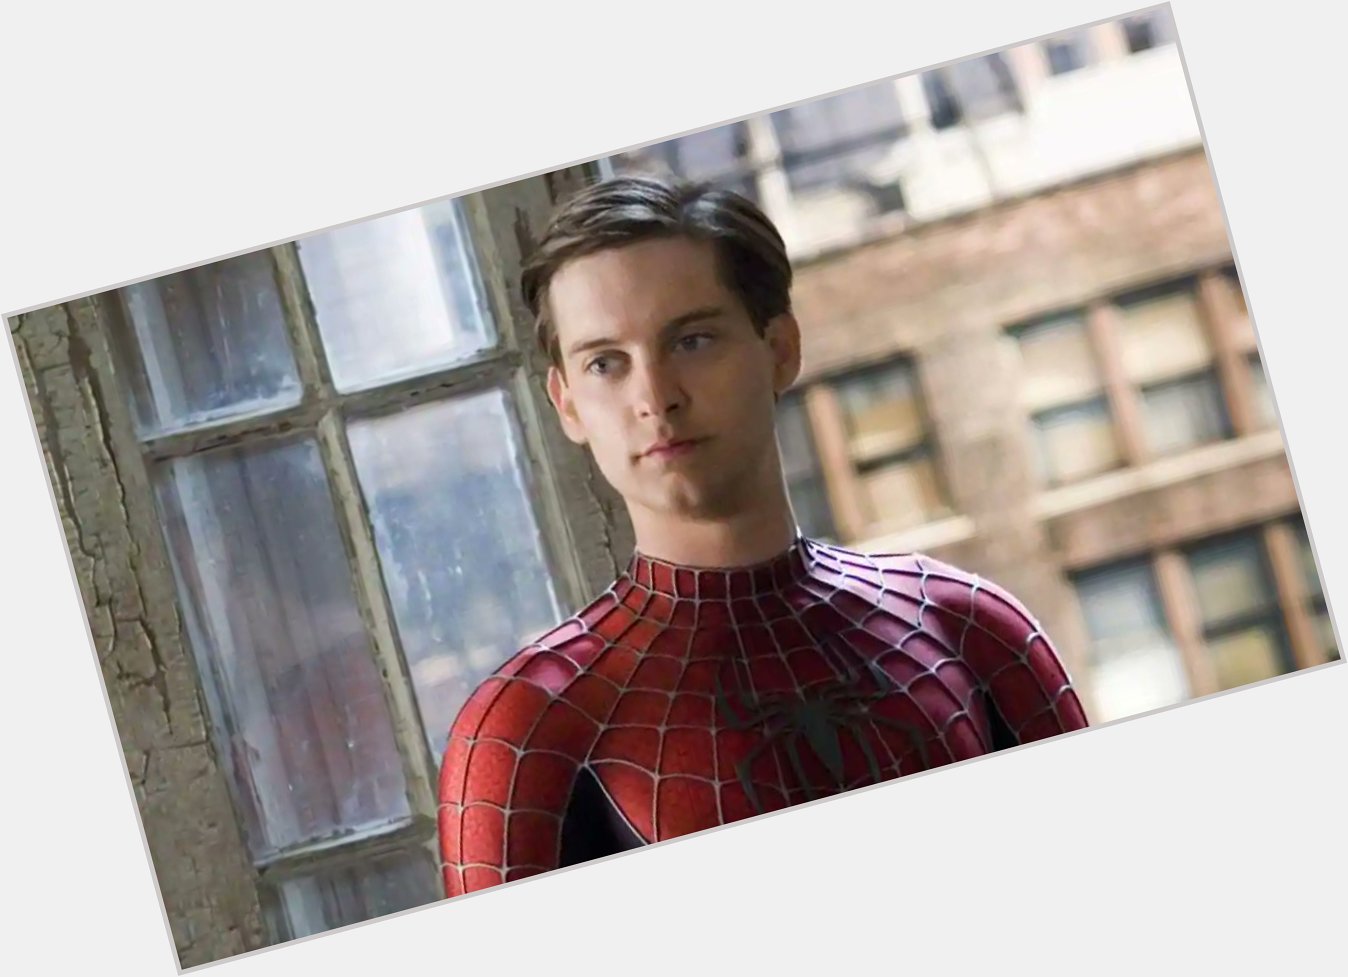 Happy birthday to Everyone\s favorite Wall crawler tobey maguire! 